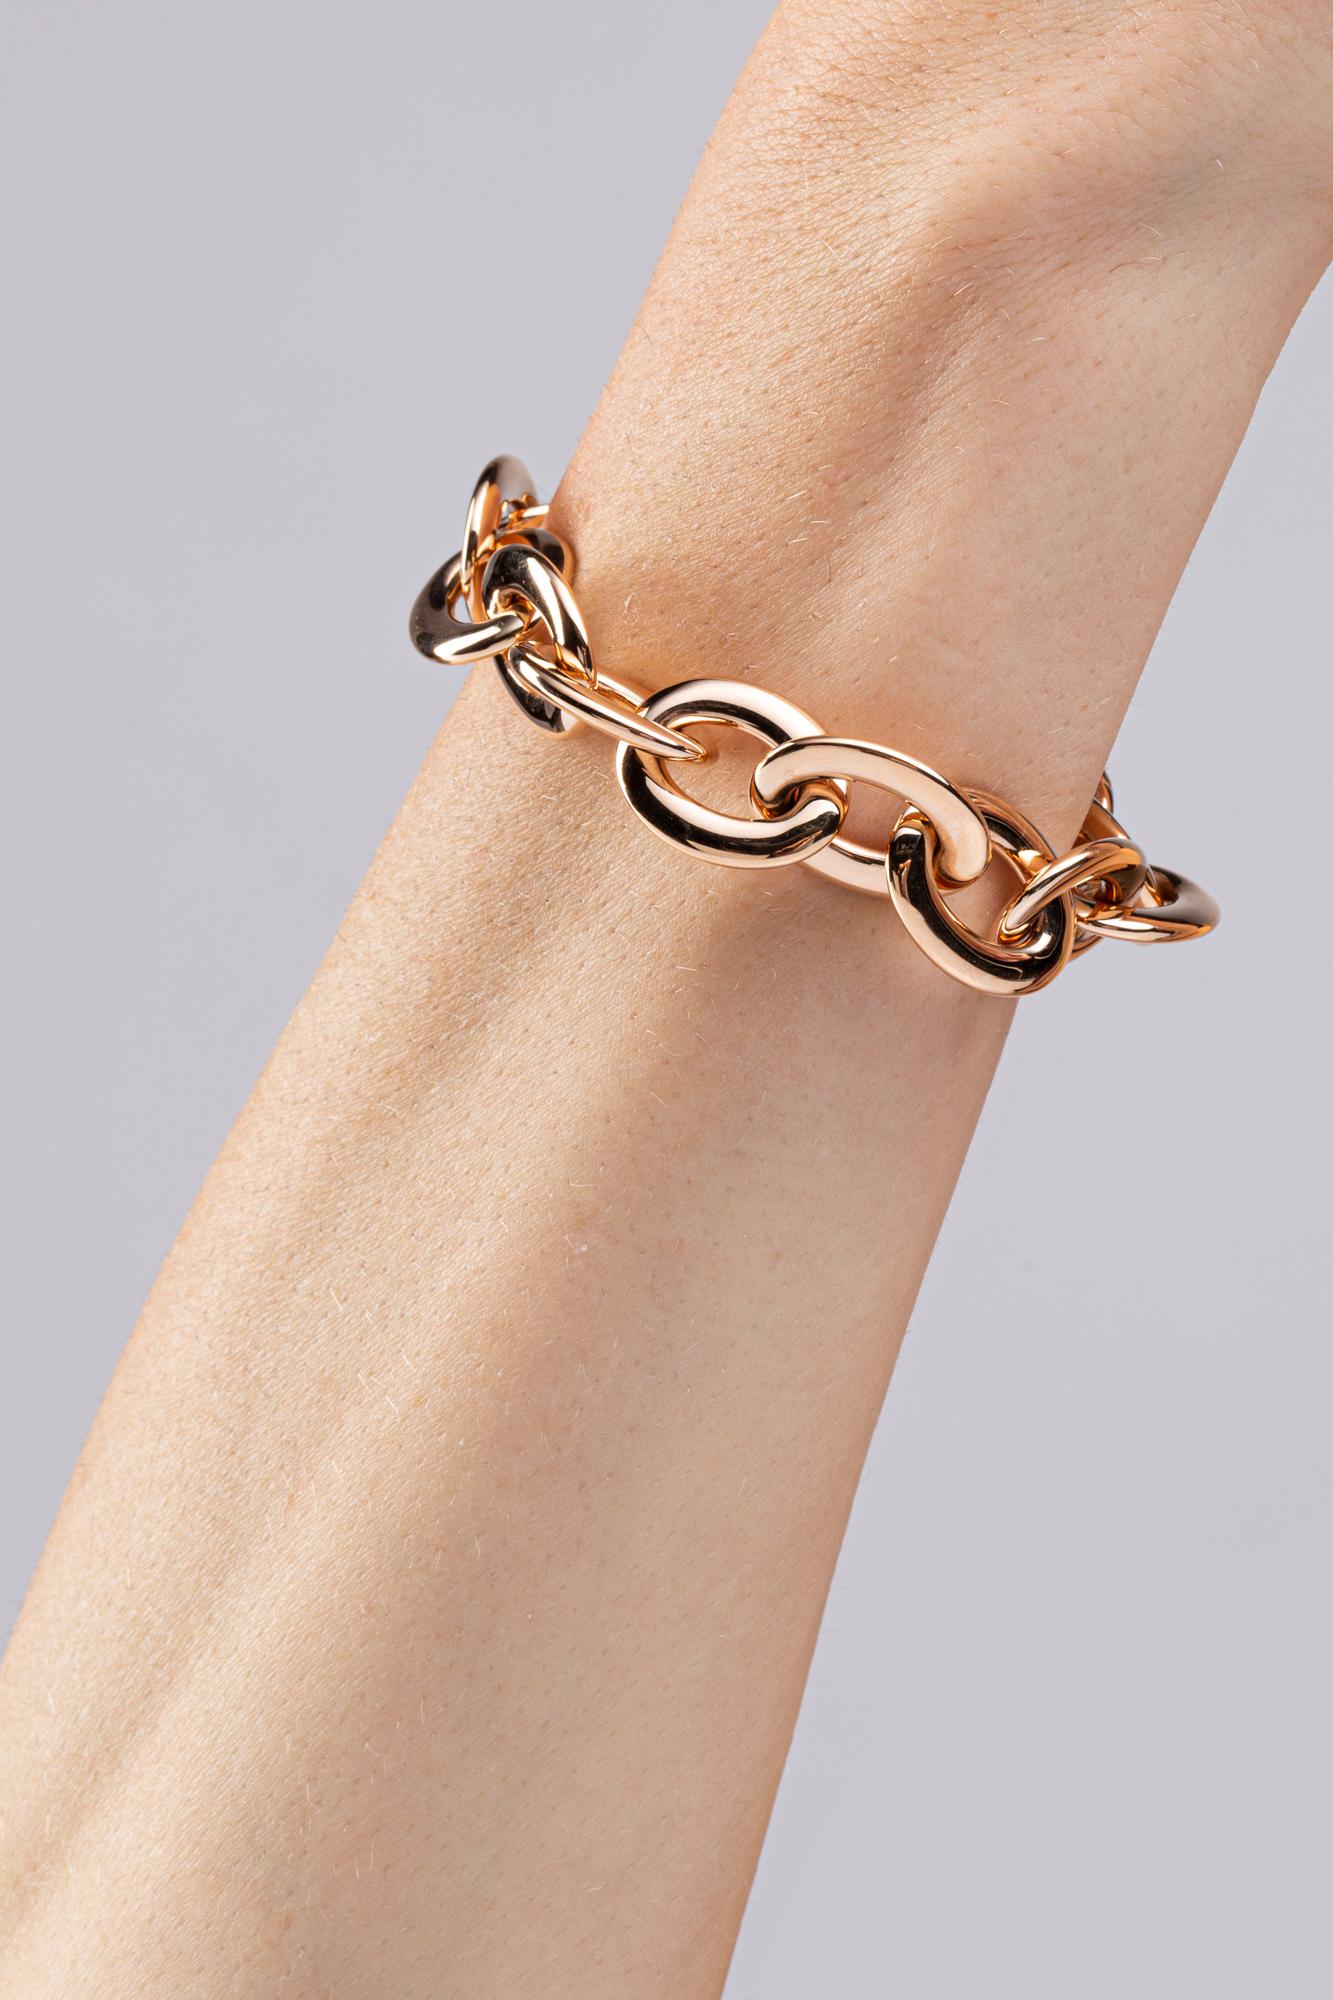 Alex Jona design collection, hand crafted in Italy, 18 karat rose gold chain bracelet.
Dimensions: W 0.65in/16.77mm, D 0.11in/2.81mm, L 7.8in/20cm.
Weight 25.5 gr.

Alex Jona jewels stand out, not only for their special design and for the excellent